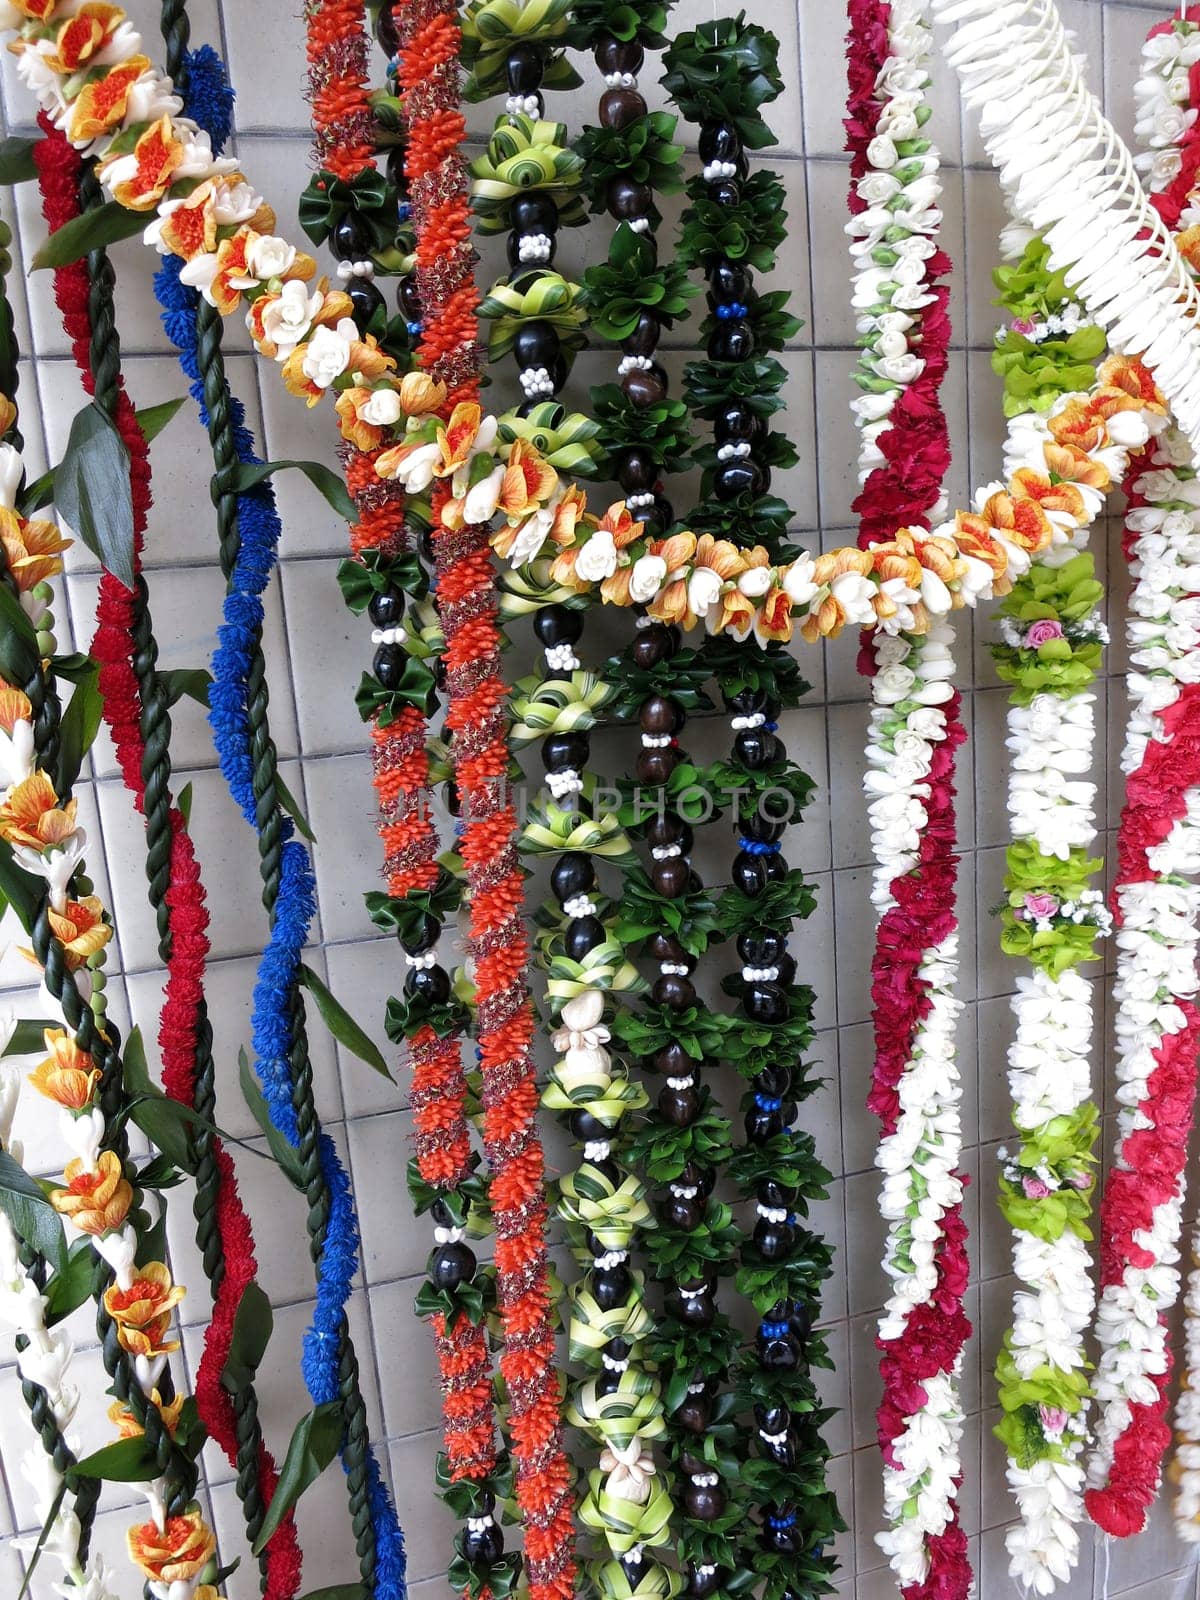 Rows of Colorful Hawaiian flower lei for sale by EricGBVD